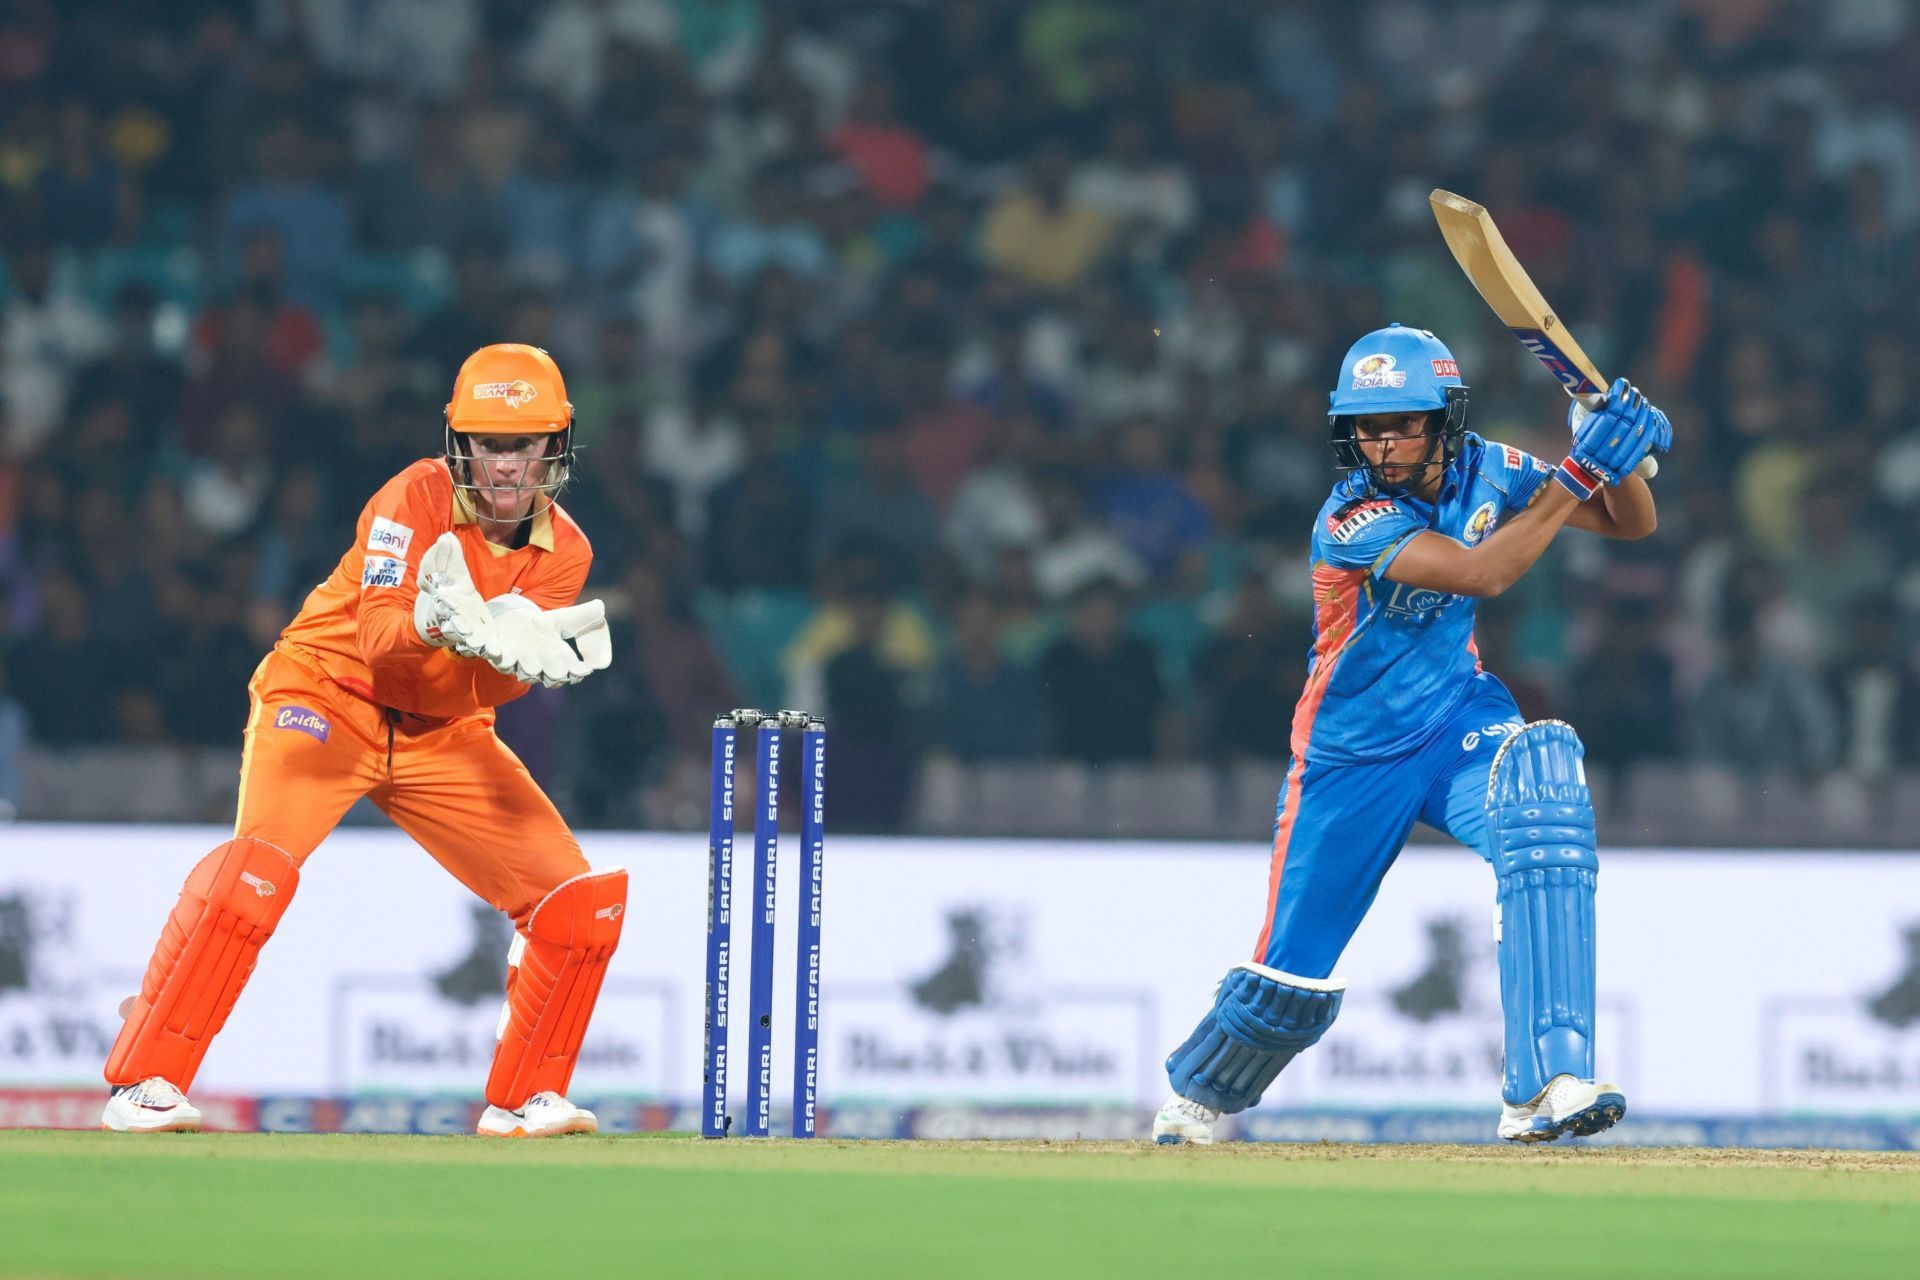 The Gujarat Giants suffered a crushing defeat against the Mumbai Indians. [P/C: WPL/Twitter]